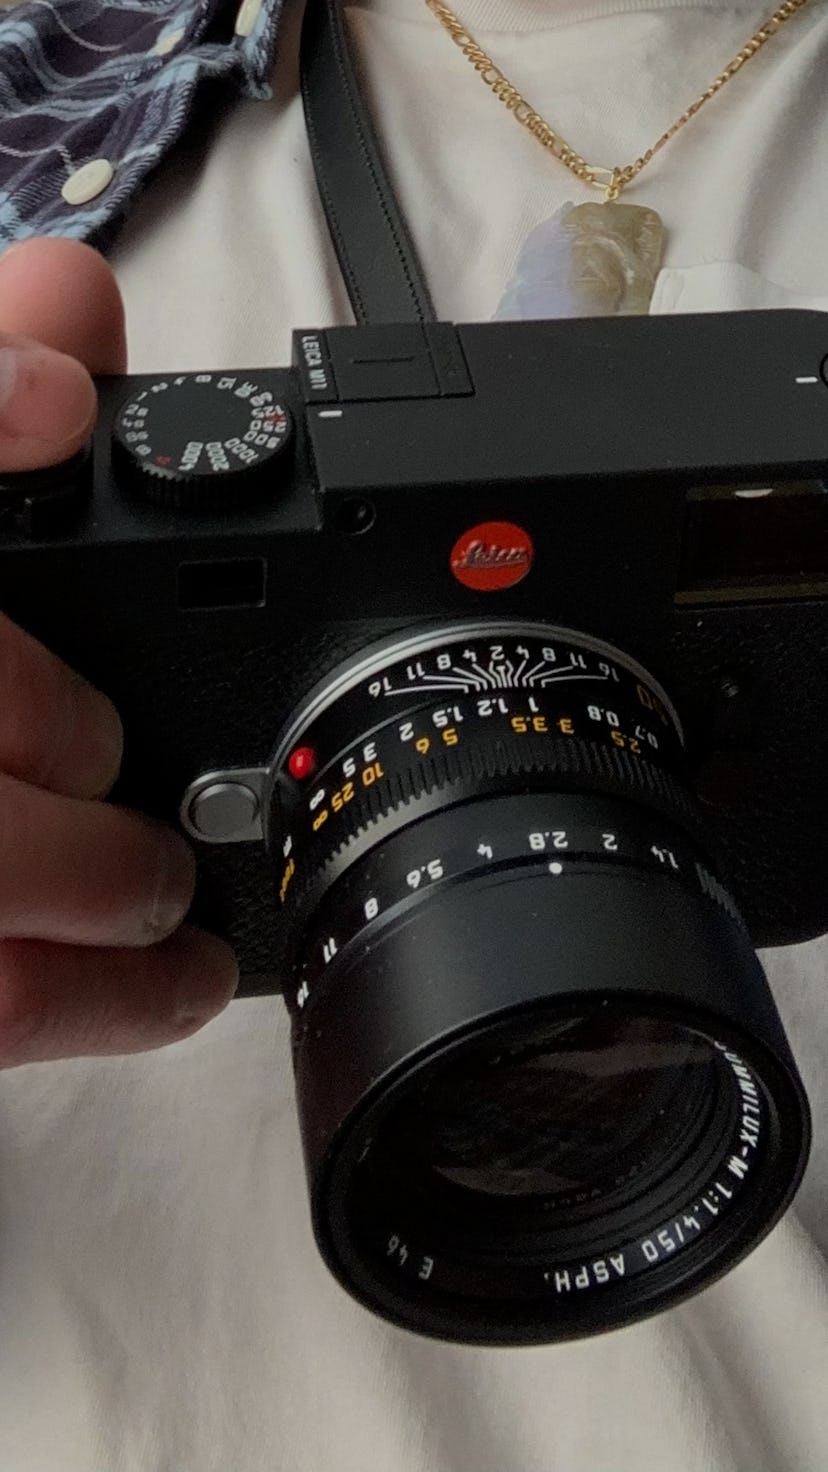 Leica M11 review: A fantastically expensive camera in an old-school shell